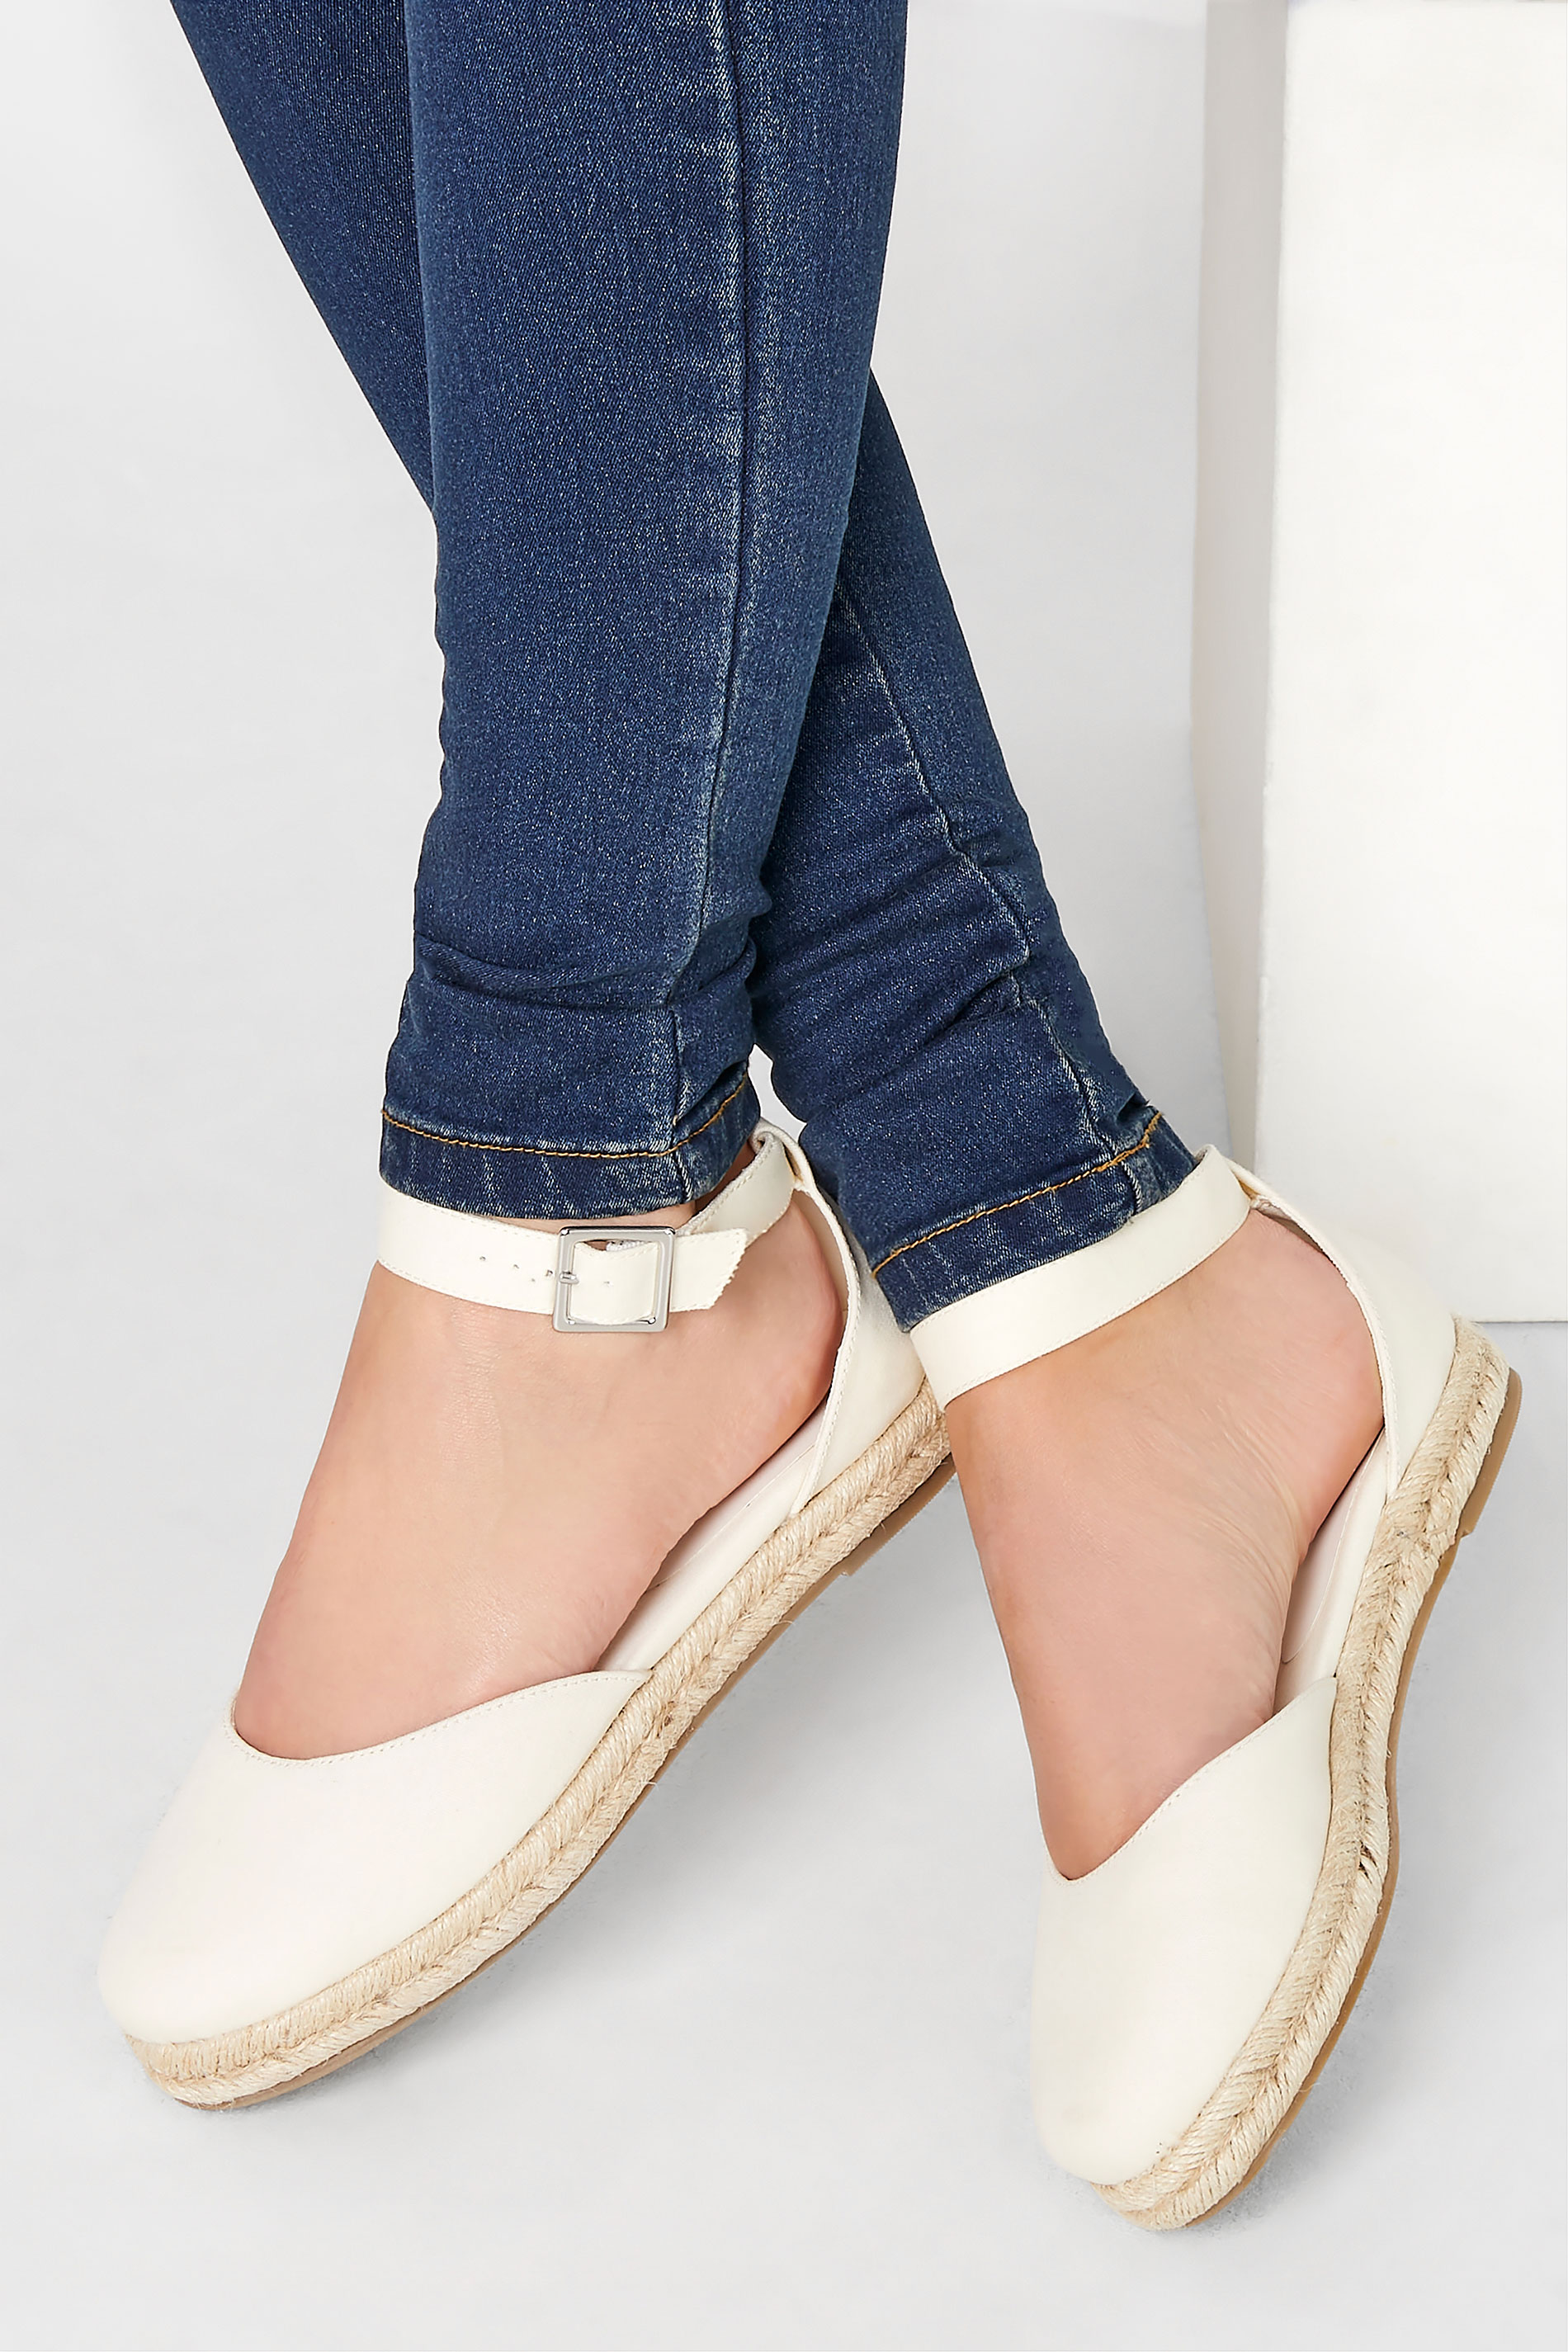 LTS White Closed Toe Espadrilles In Standard Fit | Long Tall Sally  1